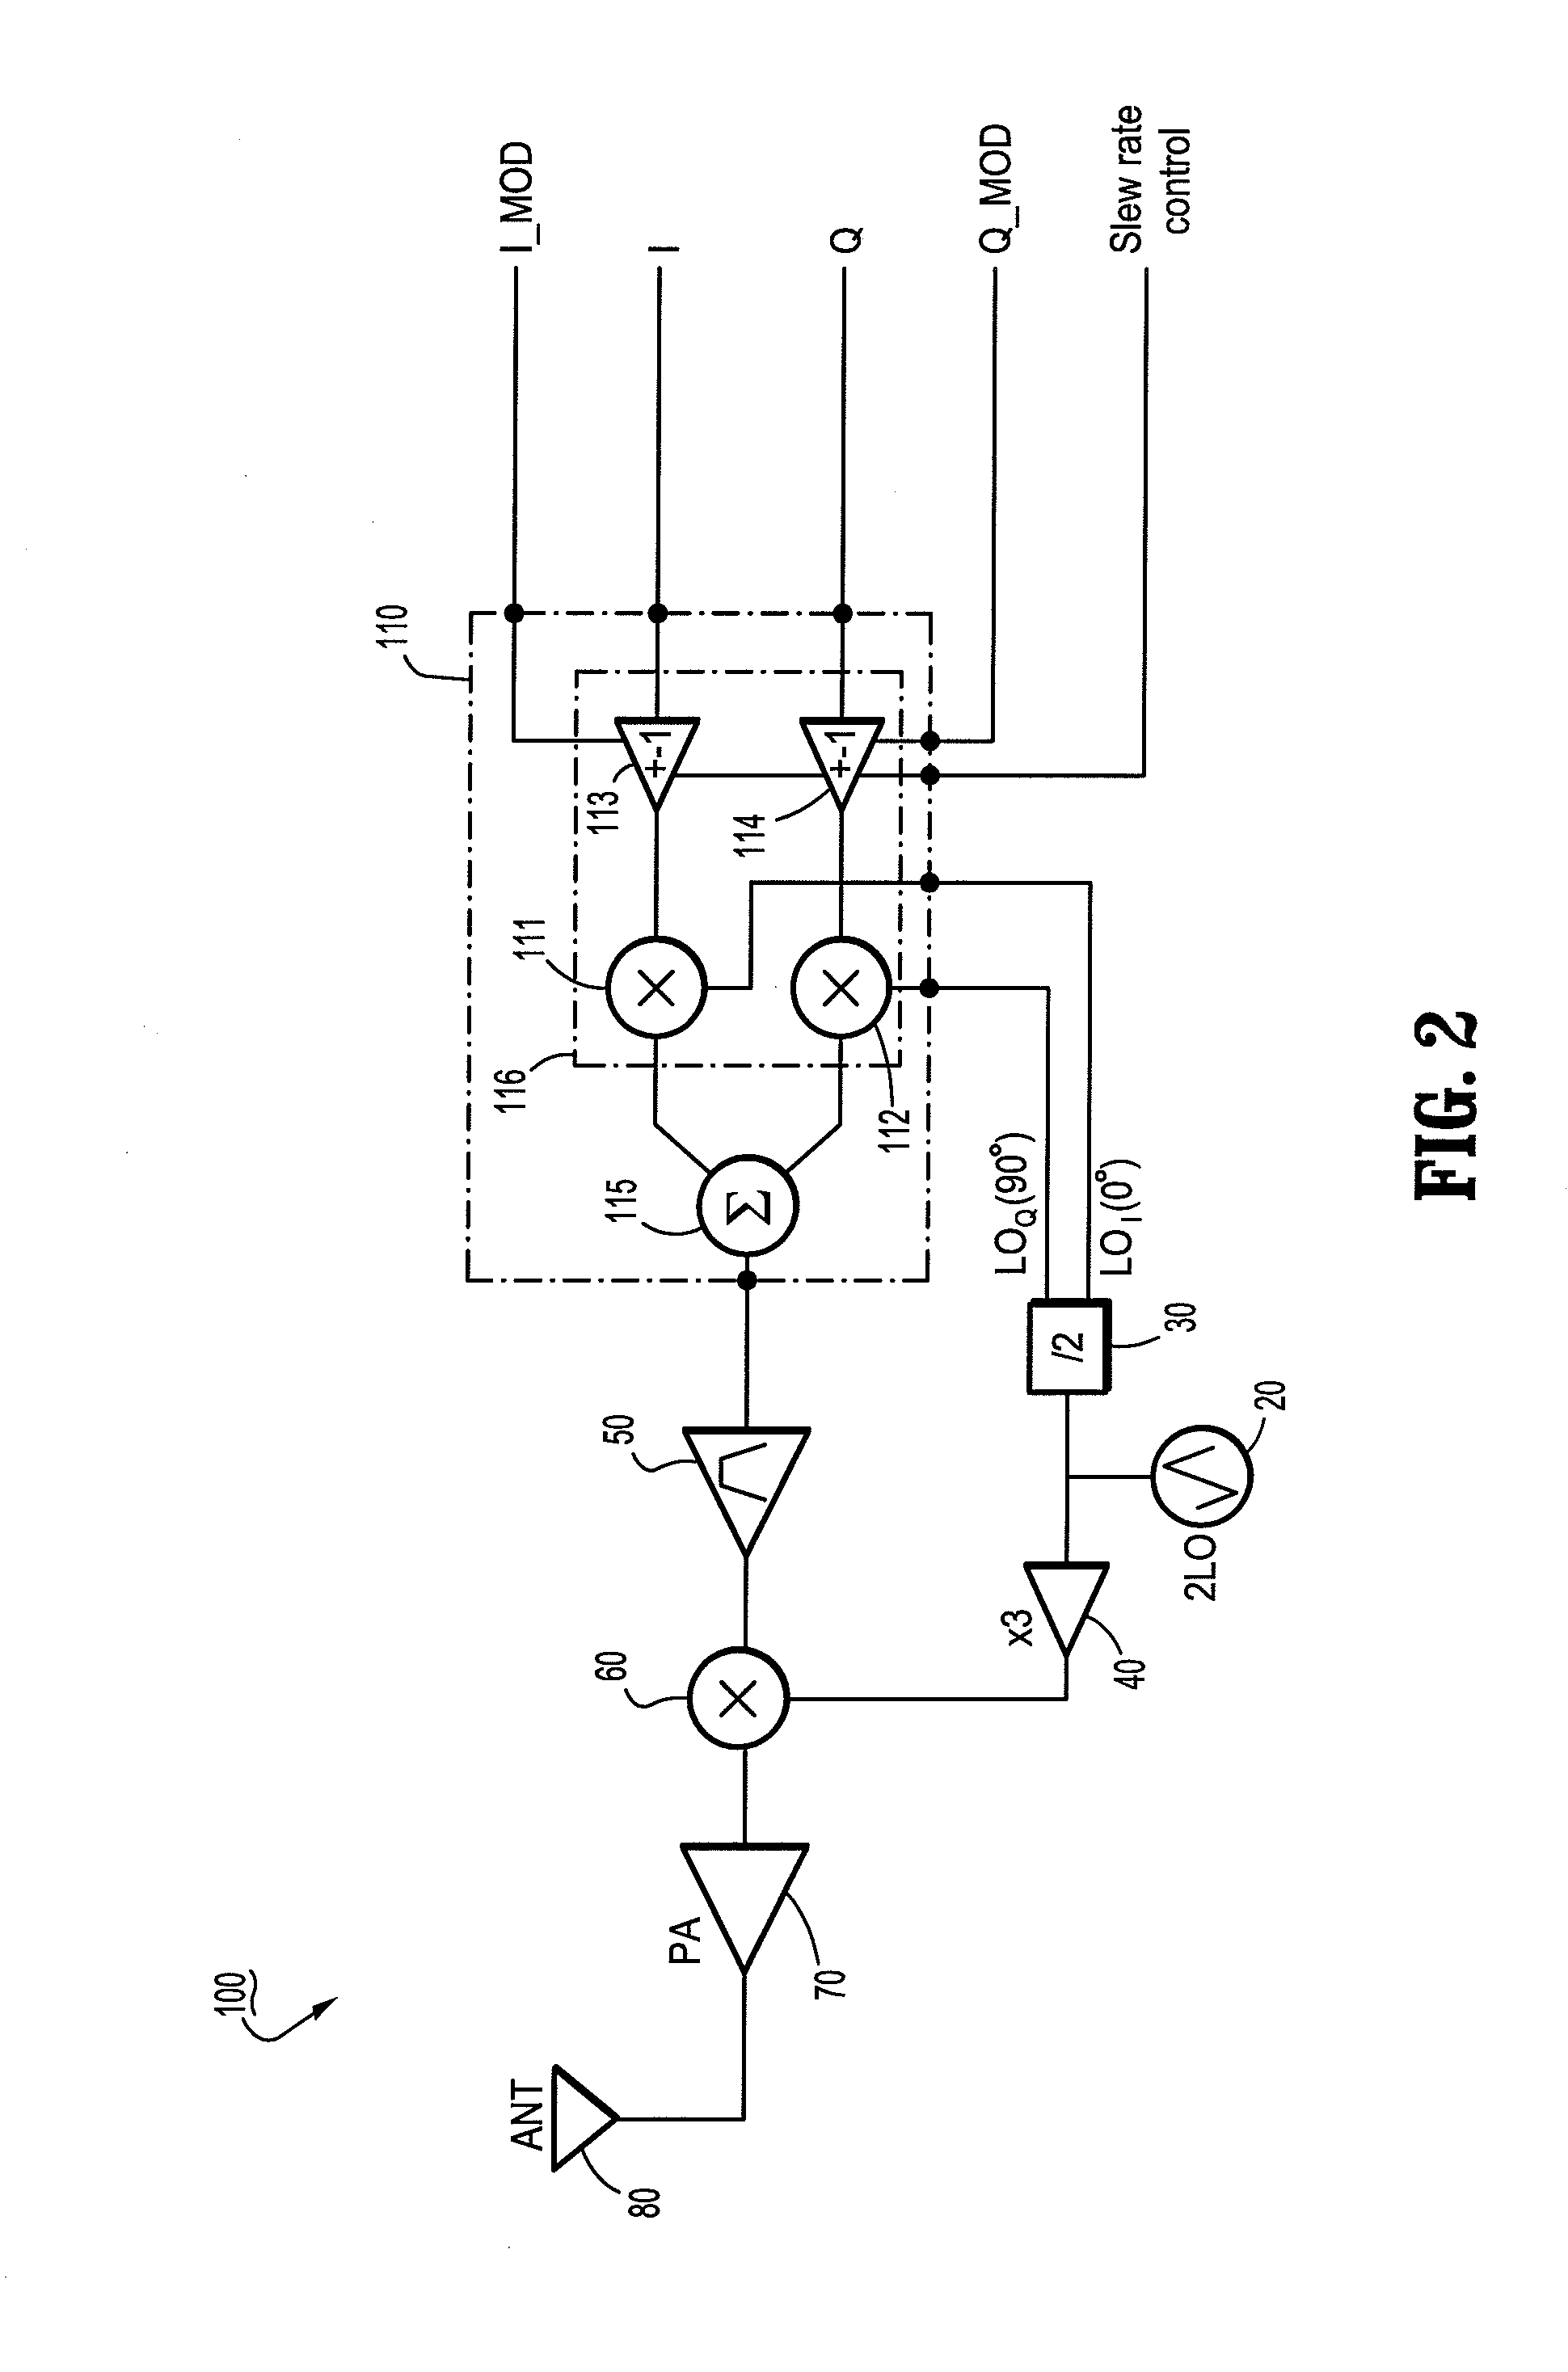 Quadrature modulation circuits and systems supporting multiple modulation modes at gigabit data rates